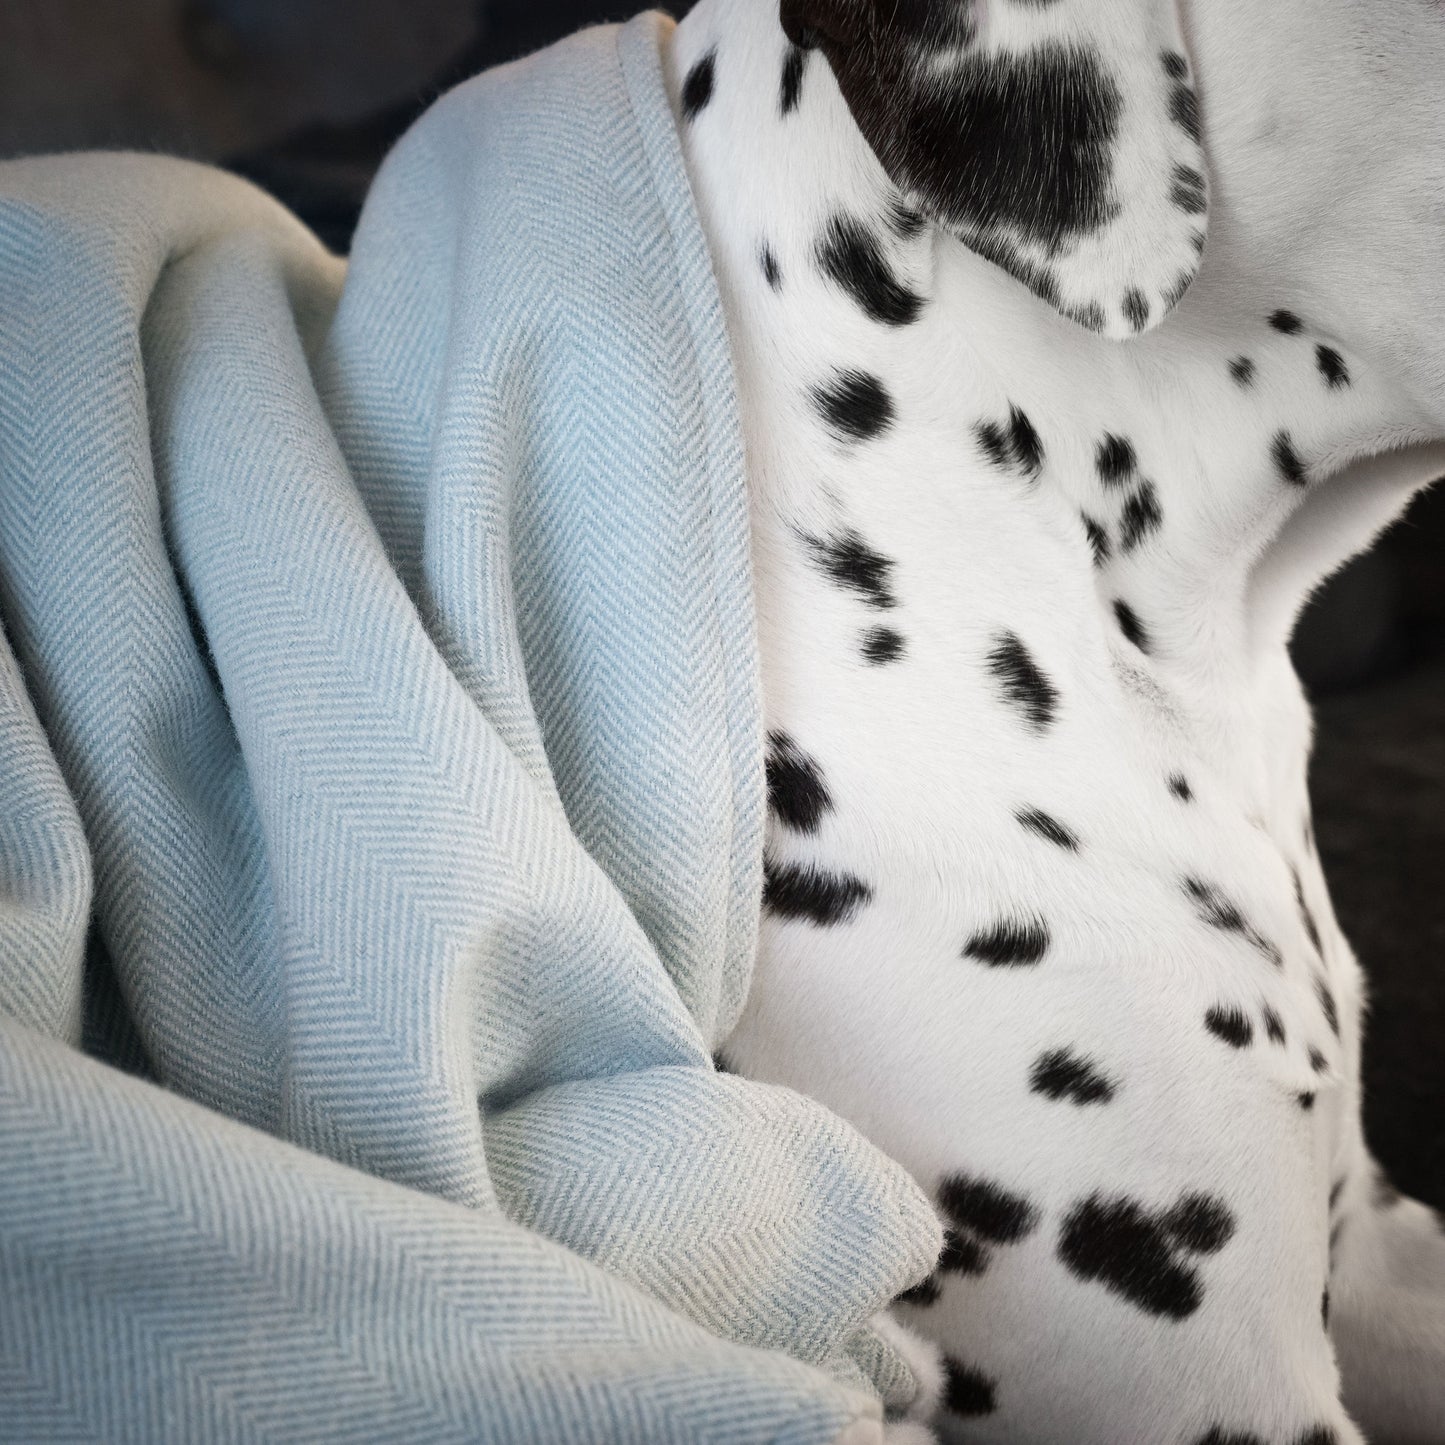 Discover Our Luxurious Duck Egg Herringbone Tweed Dog Blanket With Super Soft Sherpa & Teddy Fleece, The Perfect Blanket For Puppies, Available To Personalize And In 2 Sizes Here at Lords & Labradors US